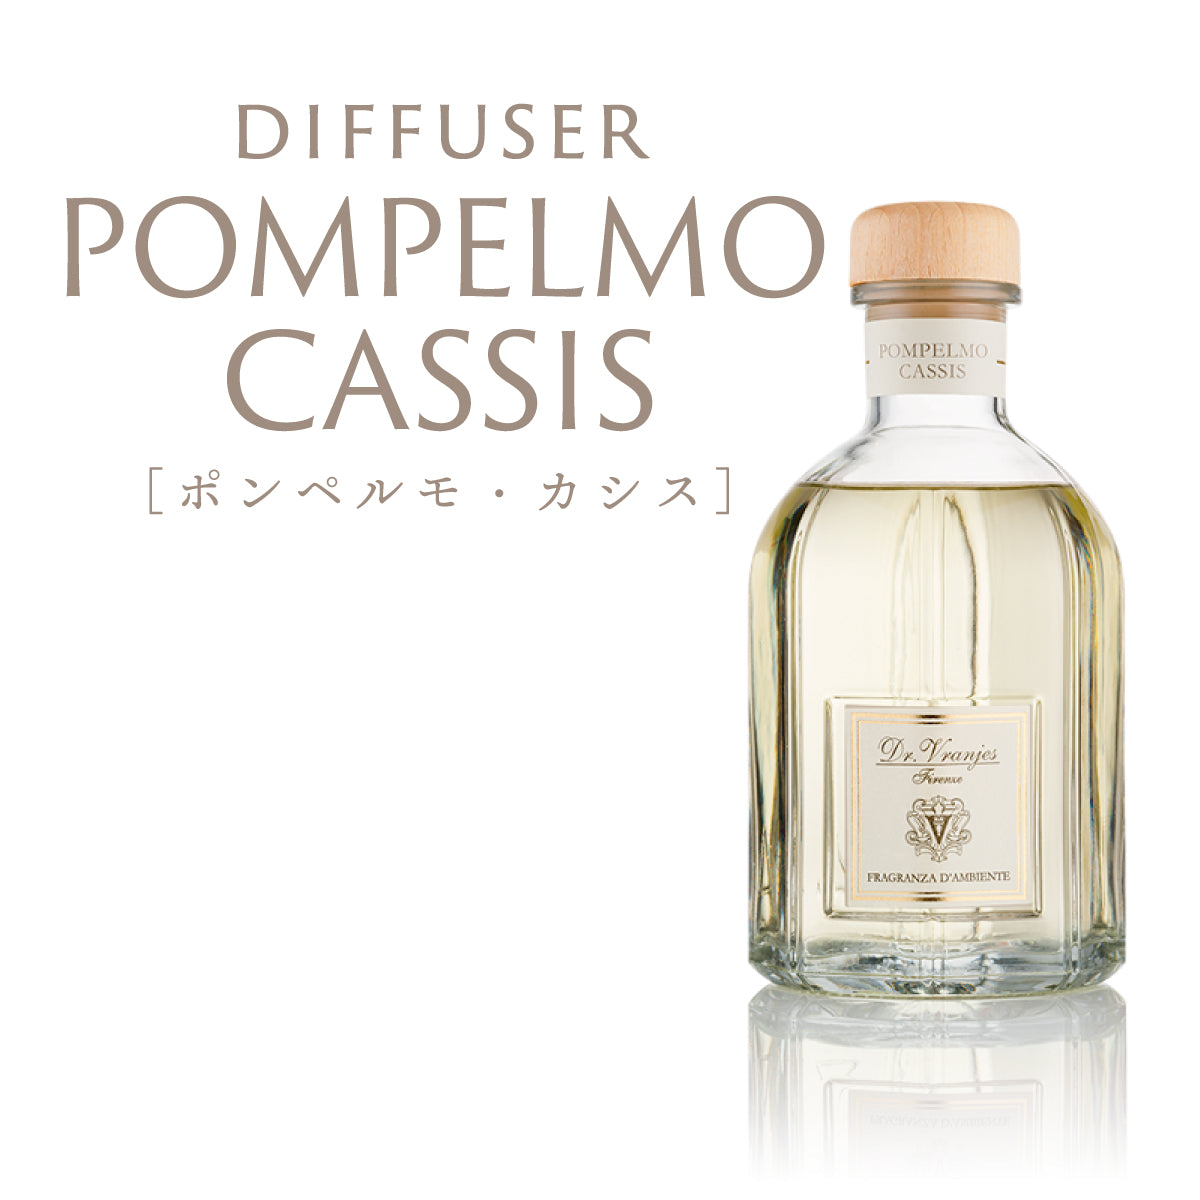 NEW ARRIVAL ドットール ヴラニエス POMPELMO CASSIS 500ml egypticf